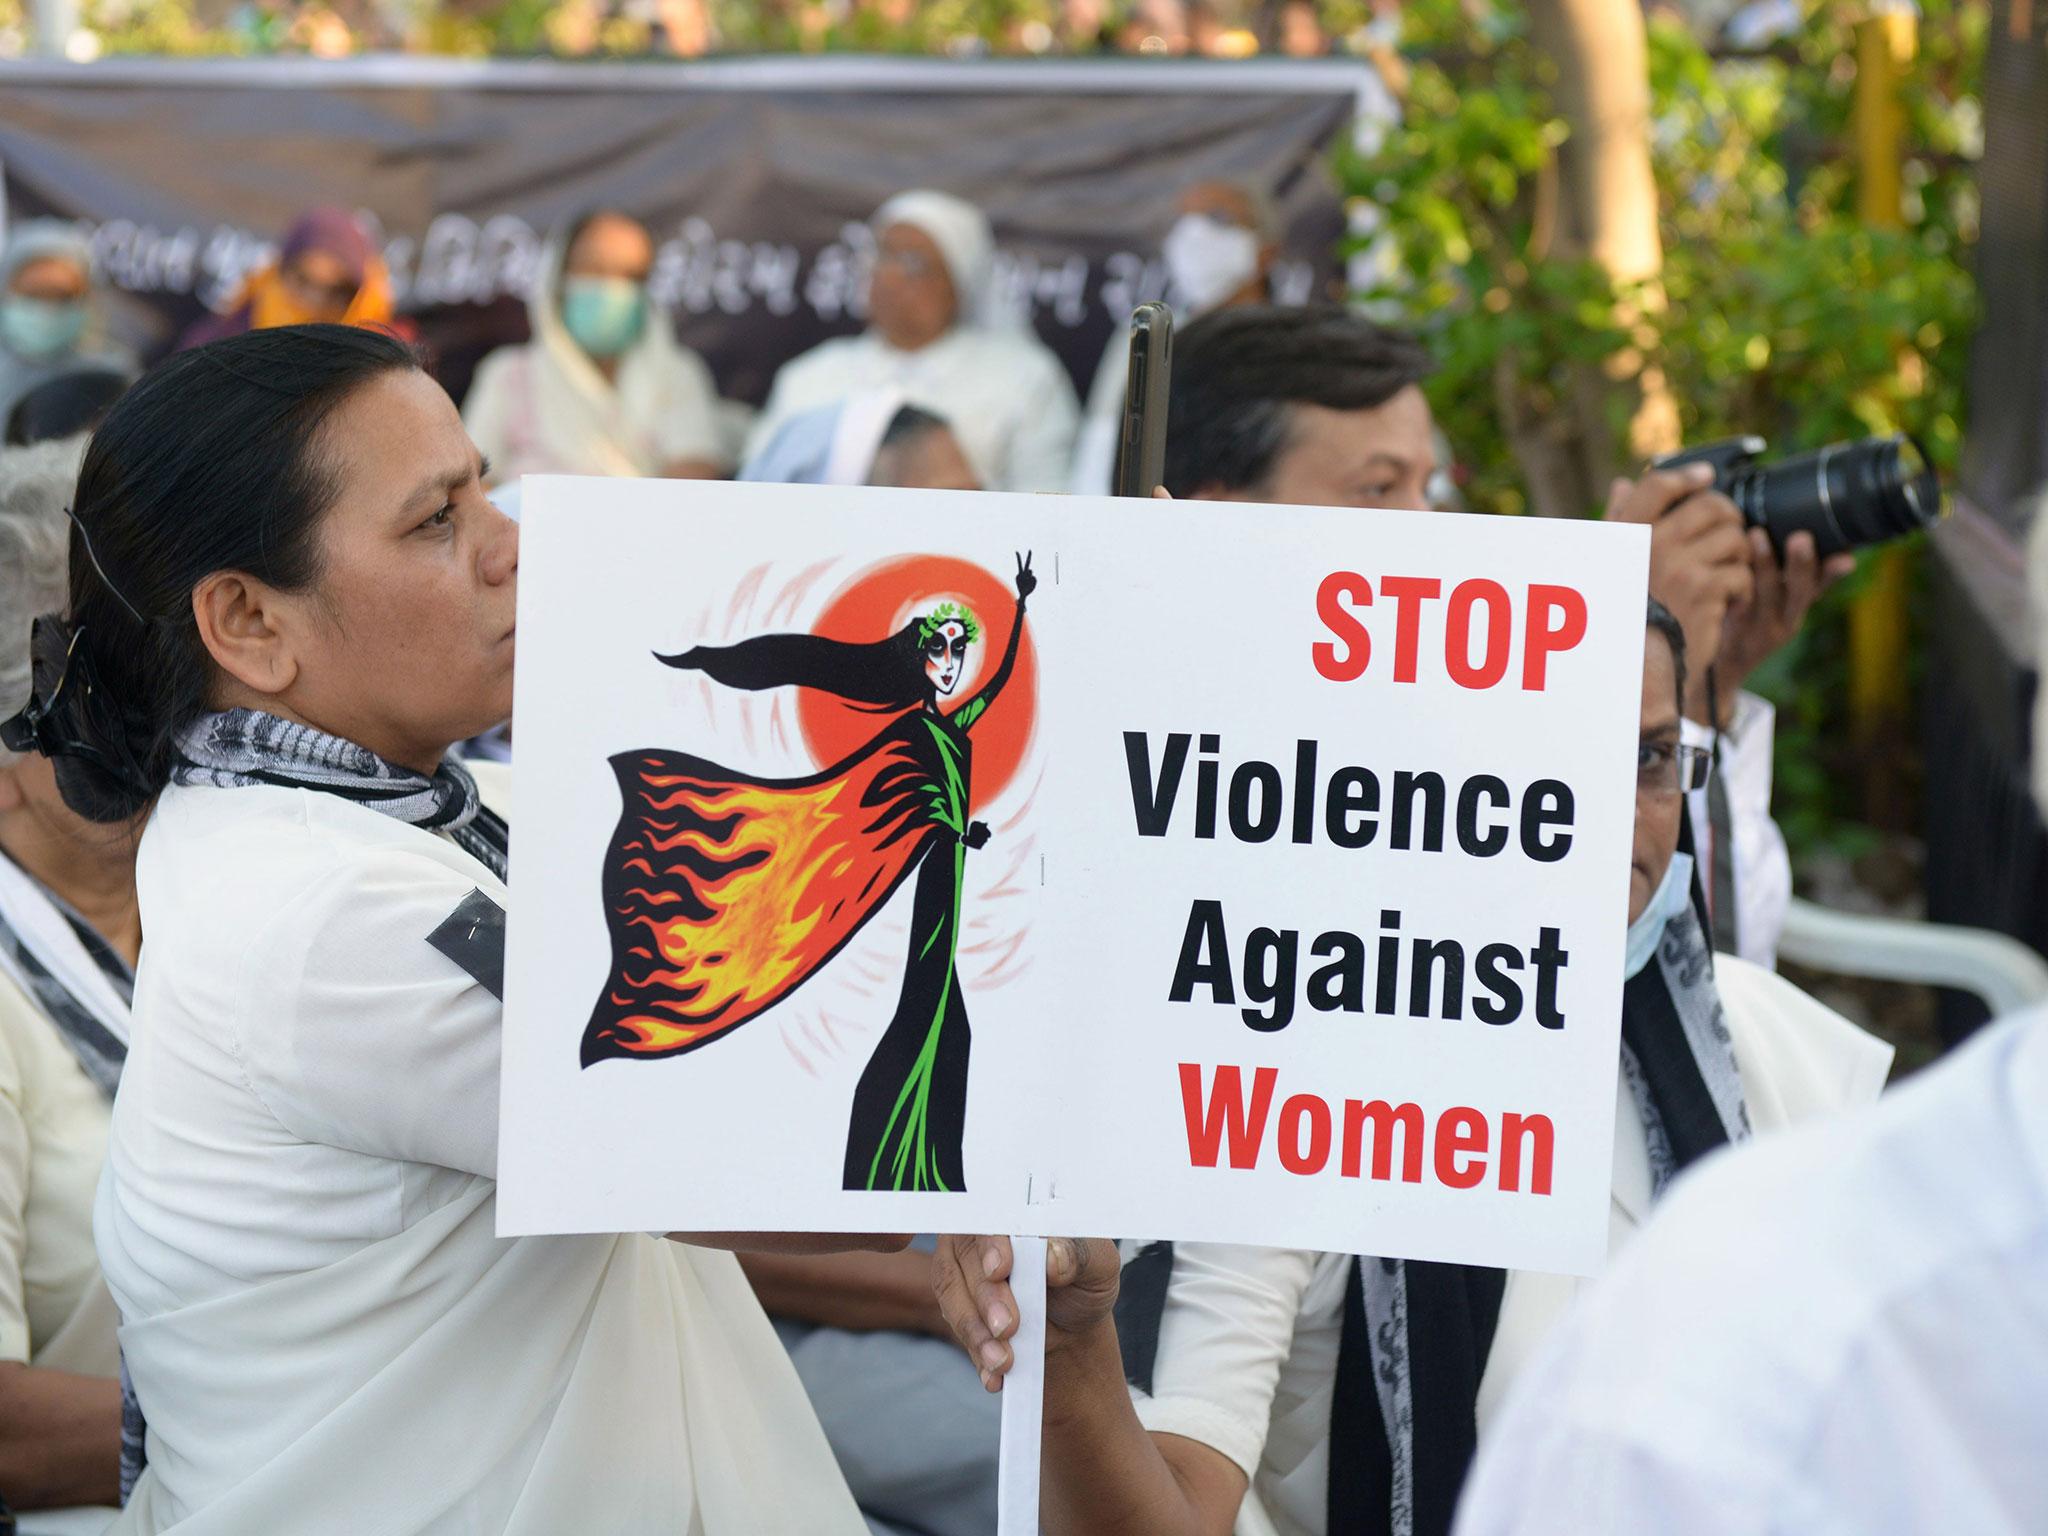 Rapes and attacks against women in India have drawn widespread protests